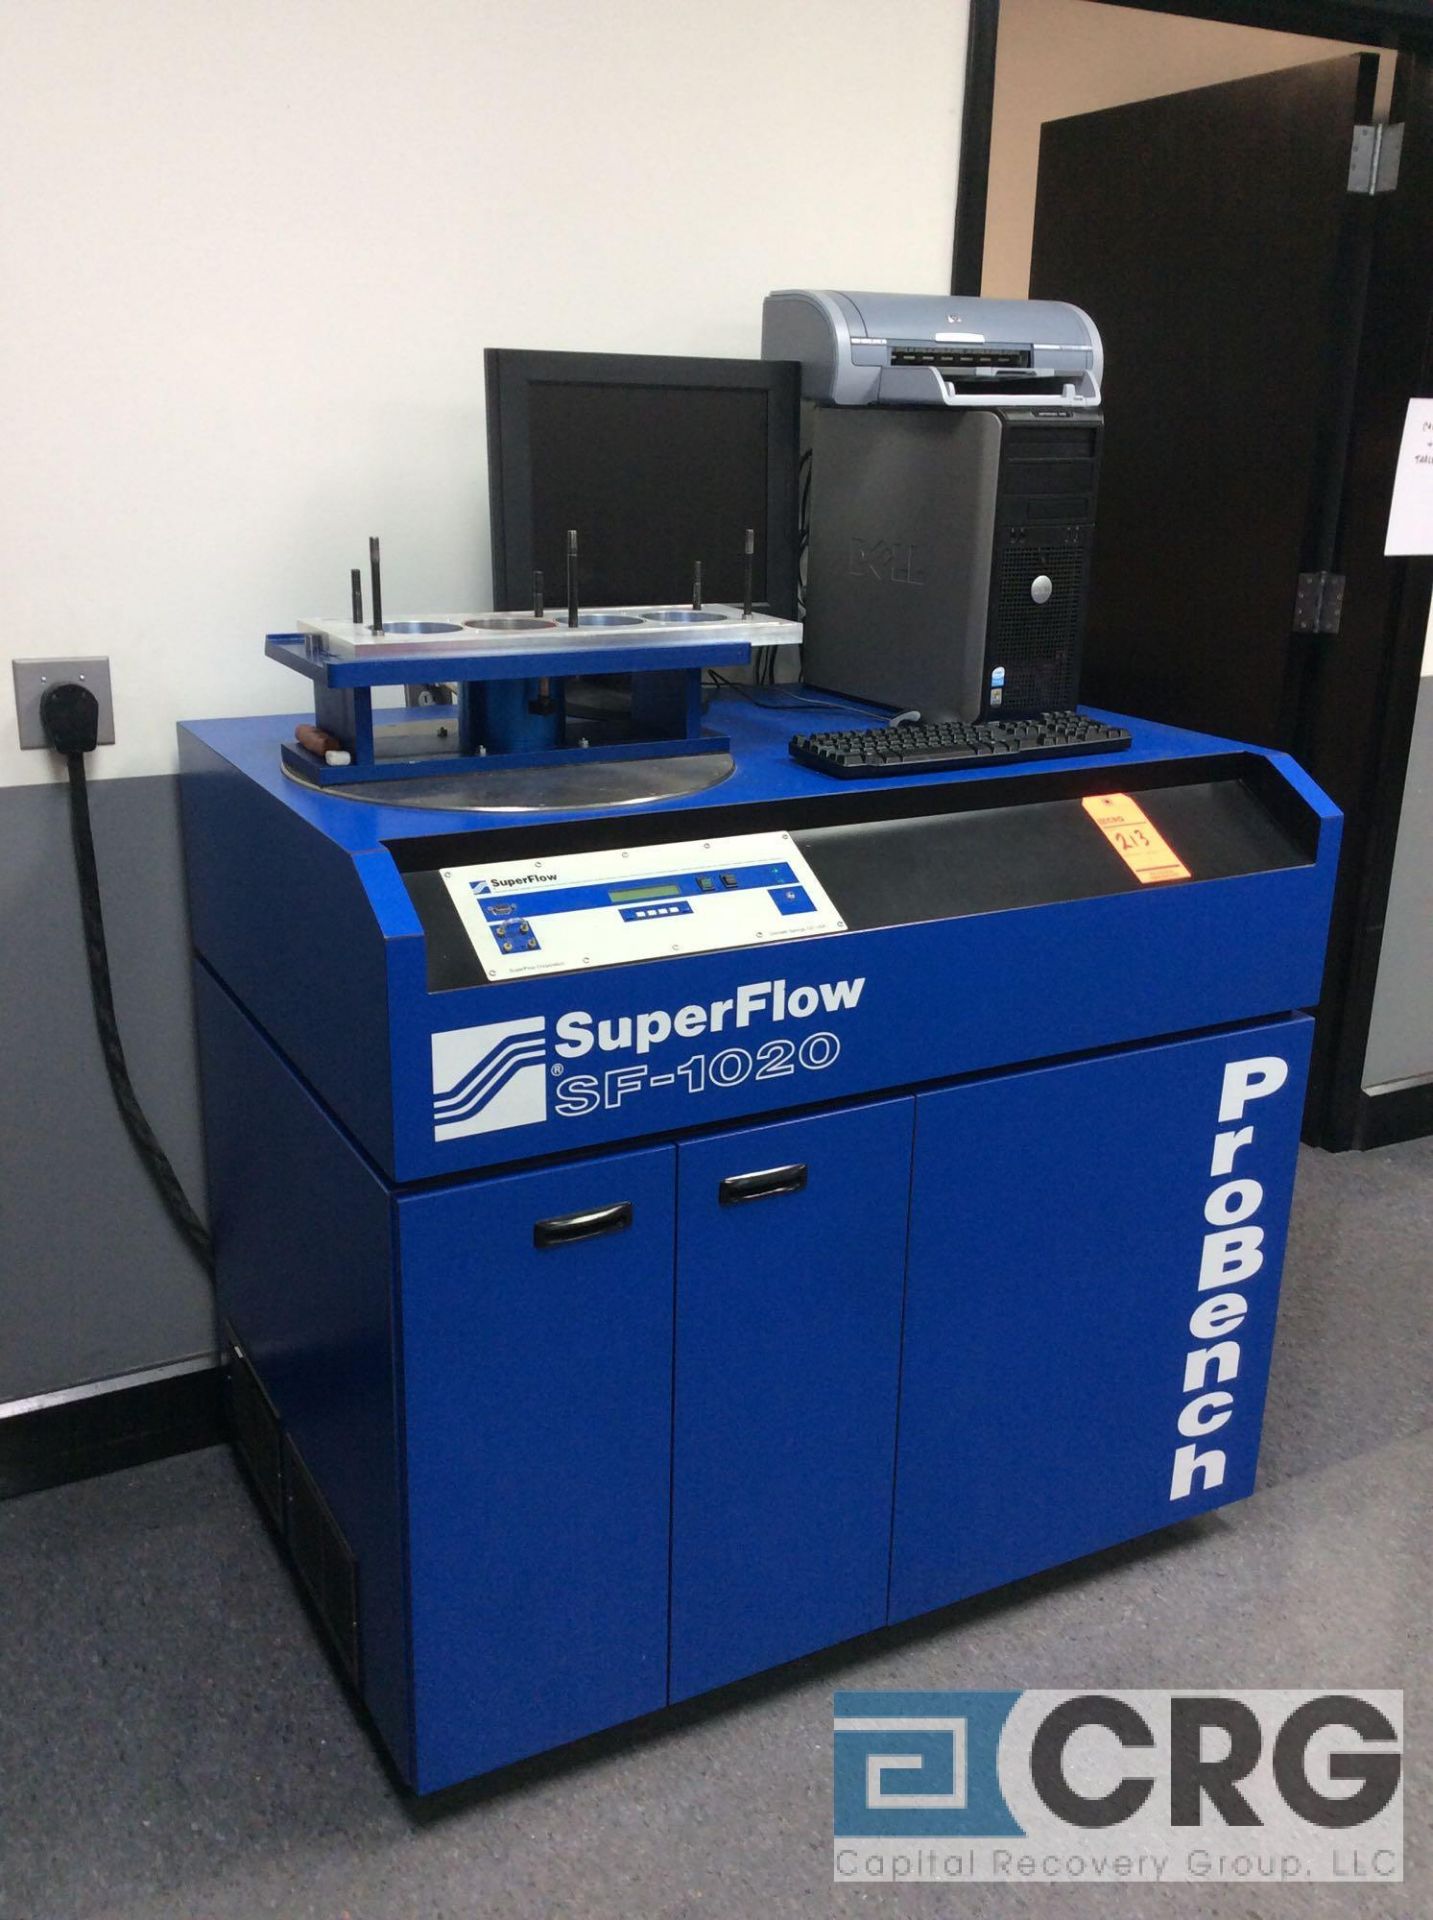 SuperFlow SF1020 Probench computerized flowbench with computer, printer, accessories - Image 2 of 5